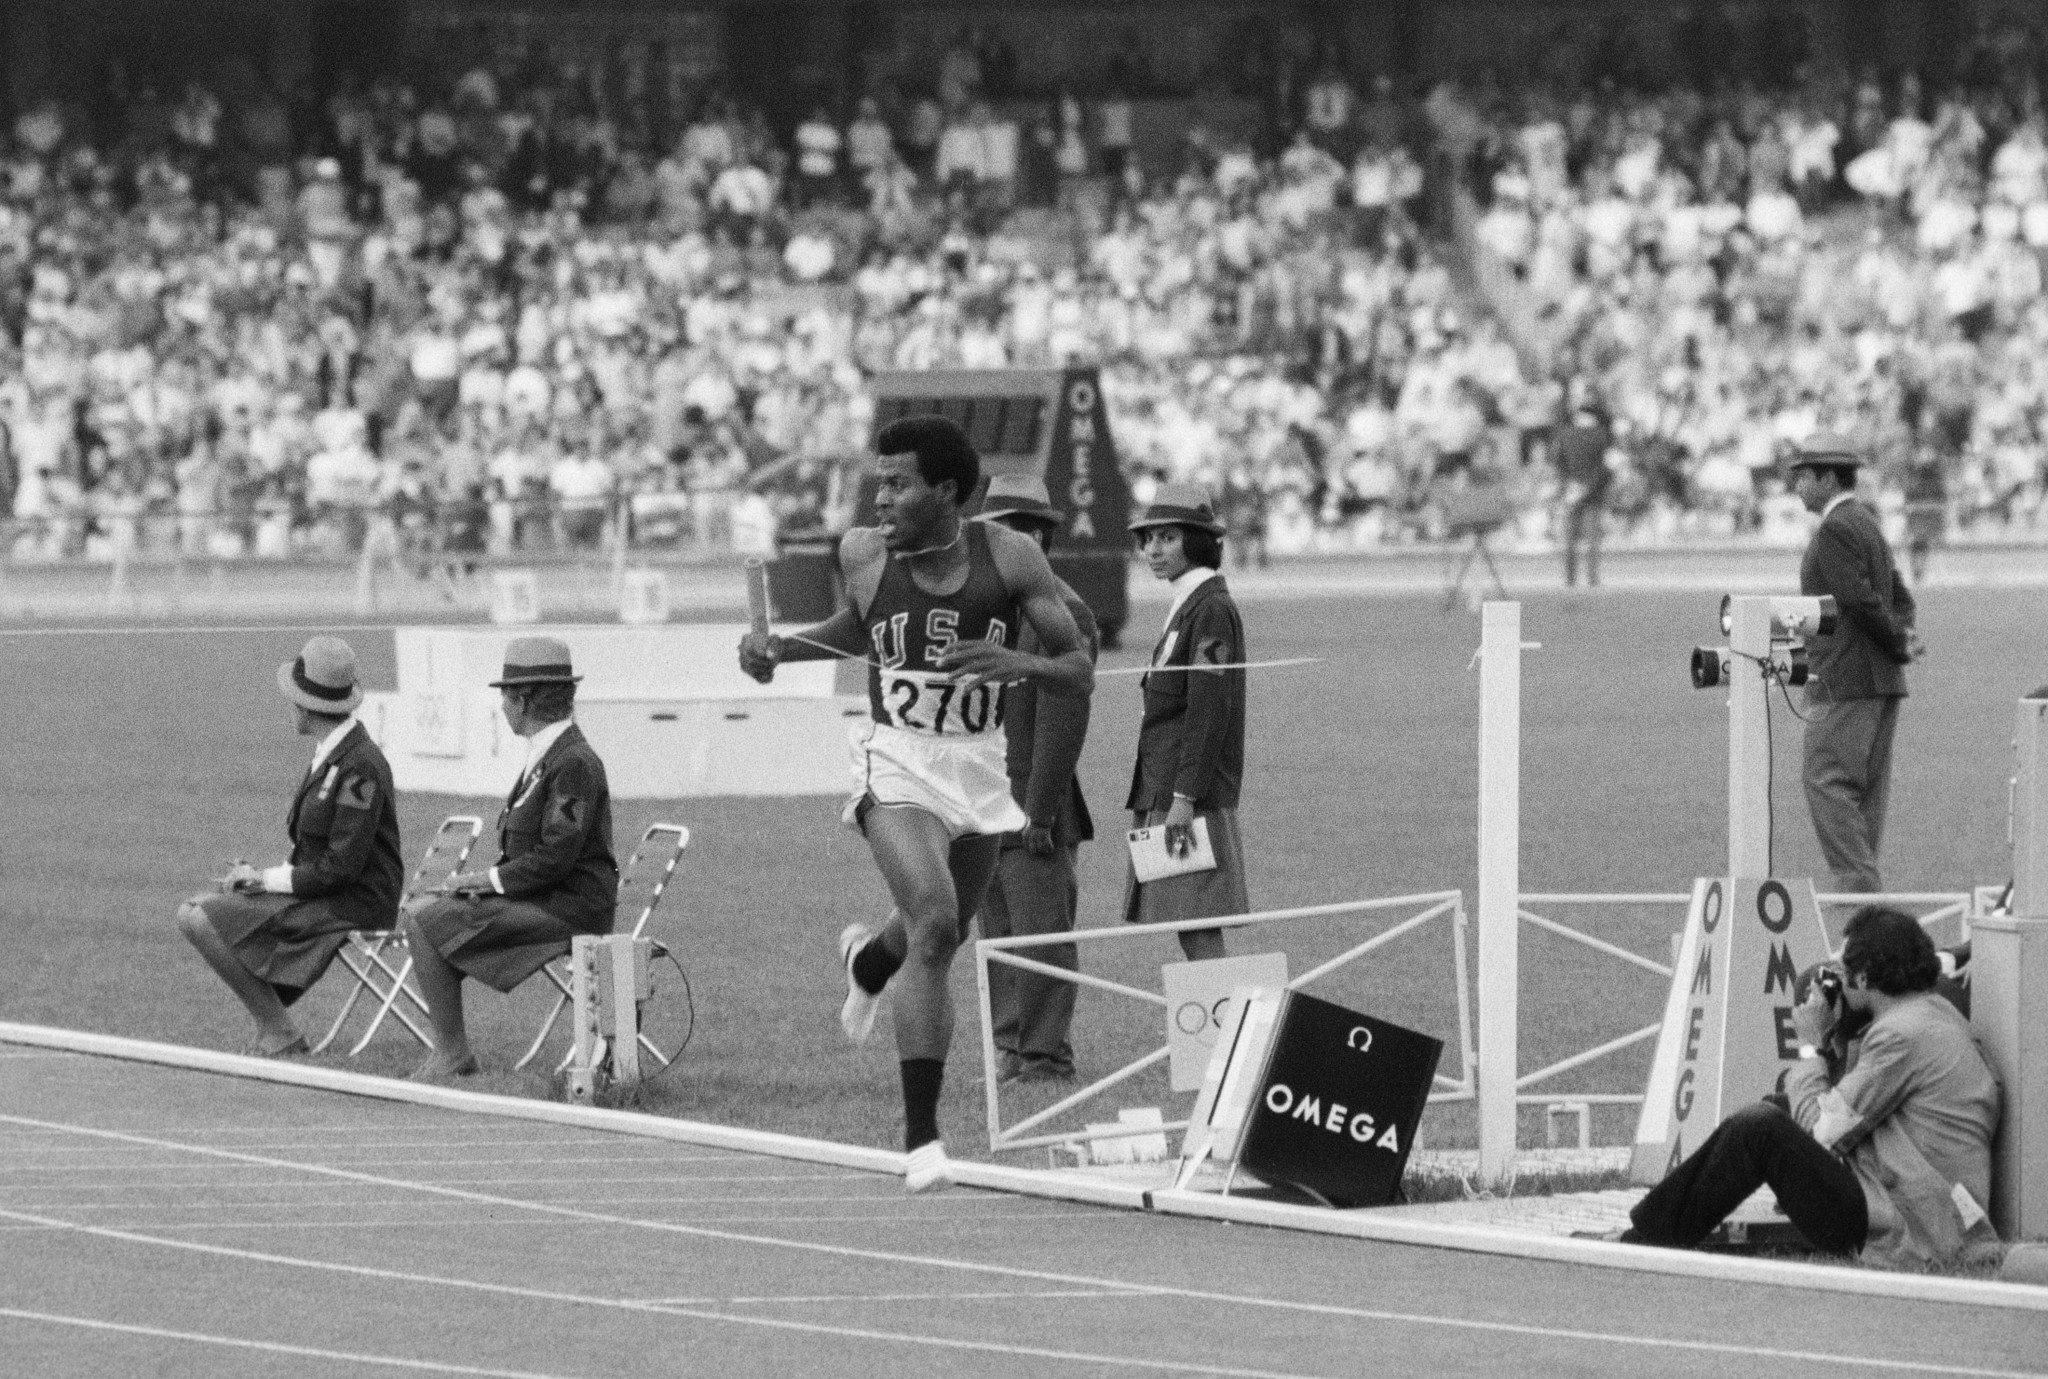 The US team set a world record time which stood for nearly 20 years in the men's 4x400m relay race at Mexico City 1968 ©Getty Images